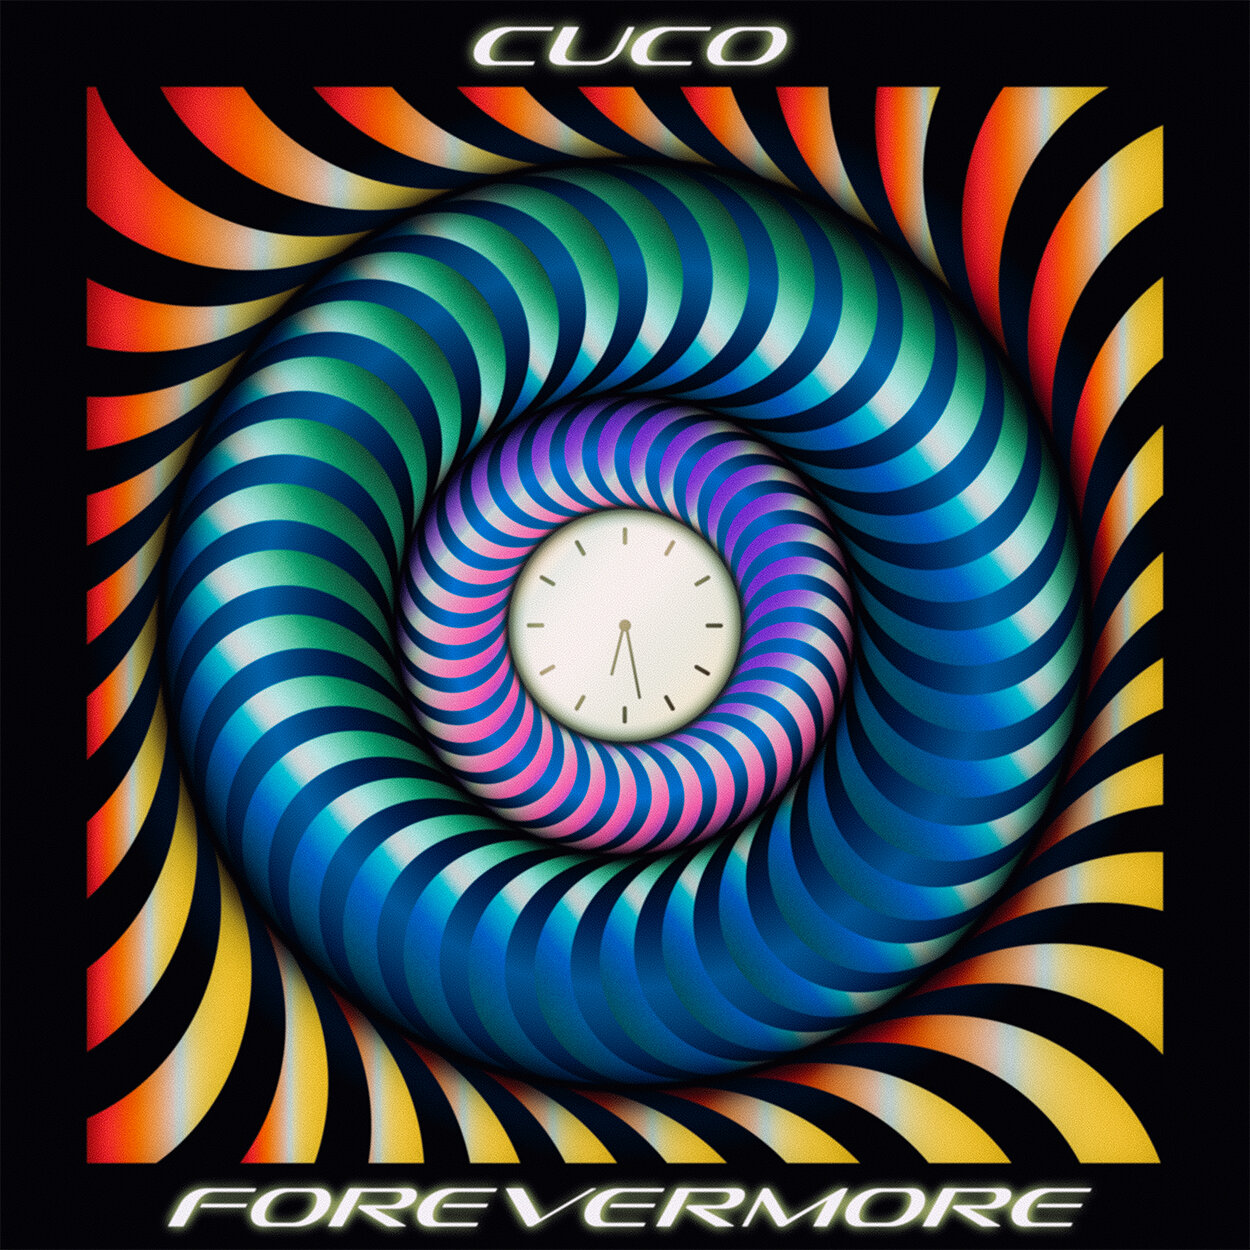 Cuco - "Forevermore" 